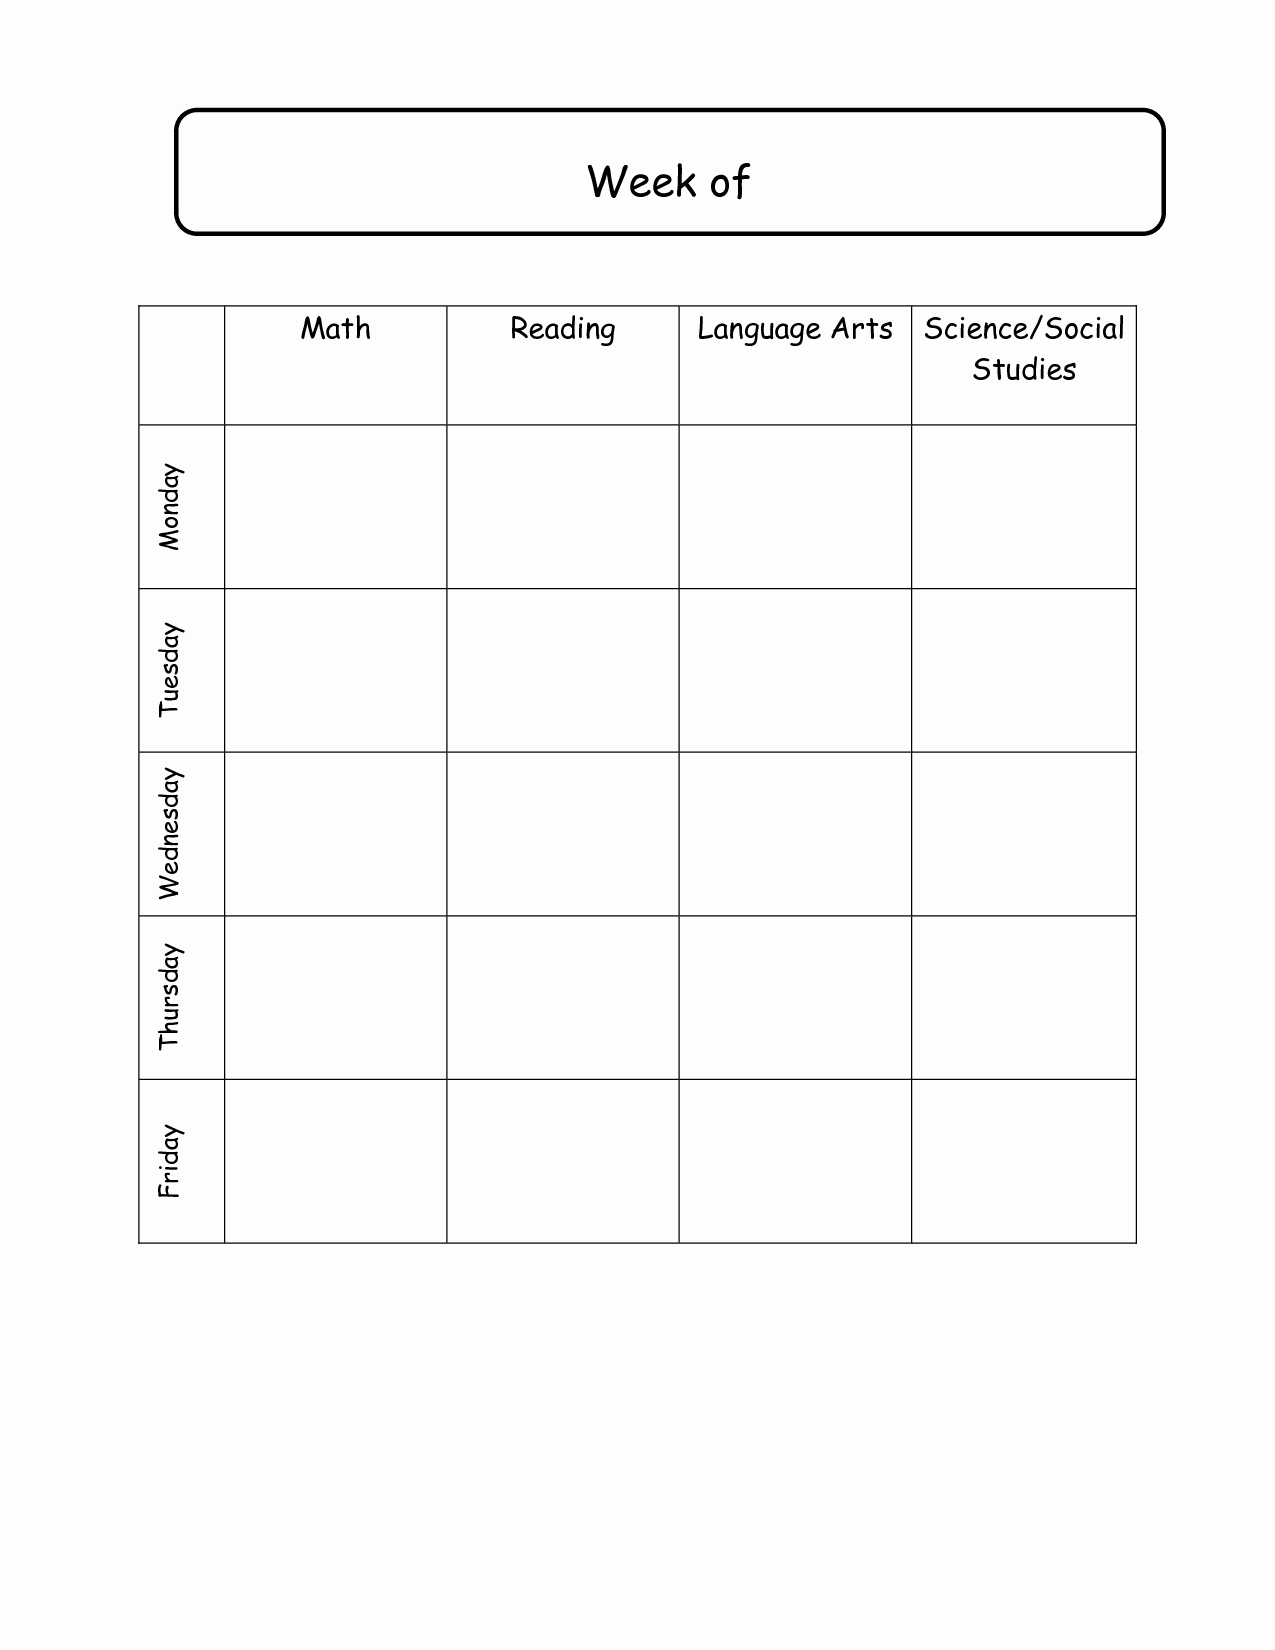 Interdisciplinary Unit Plan Template Awesome Elementary School Daily Schedule Template